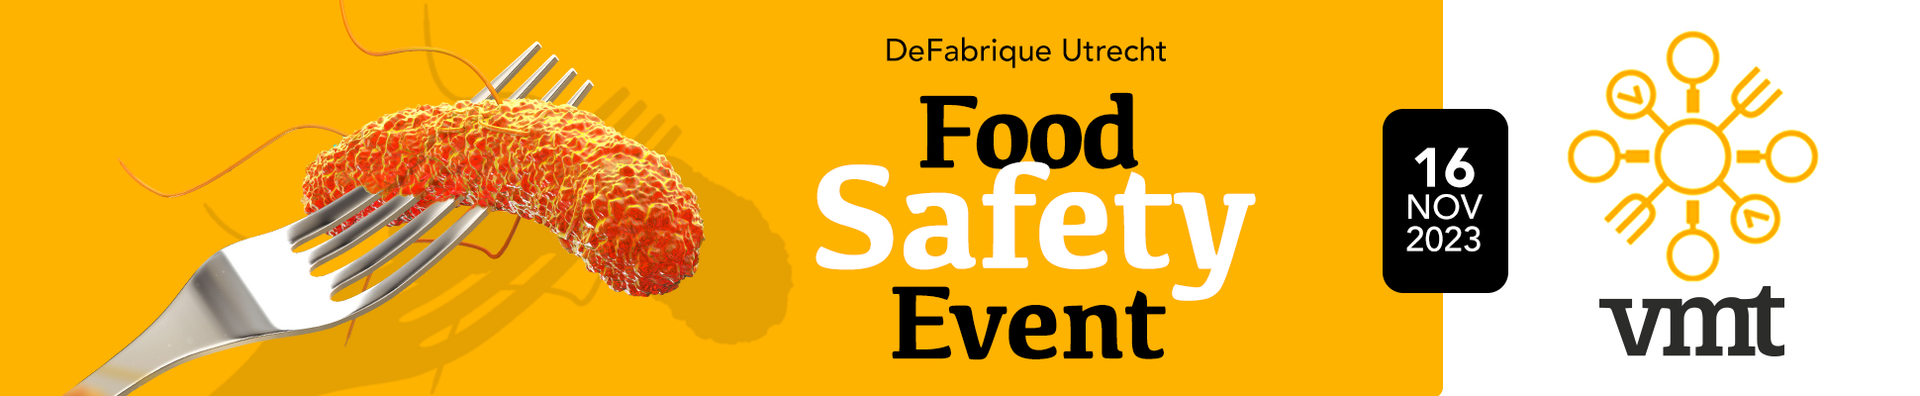 Food Safety Event 2023